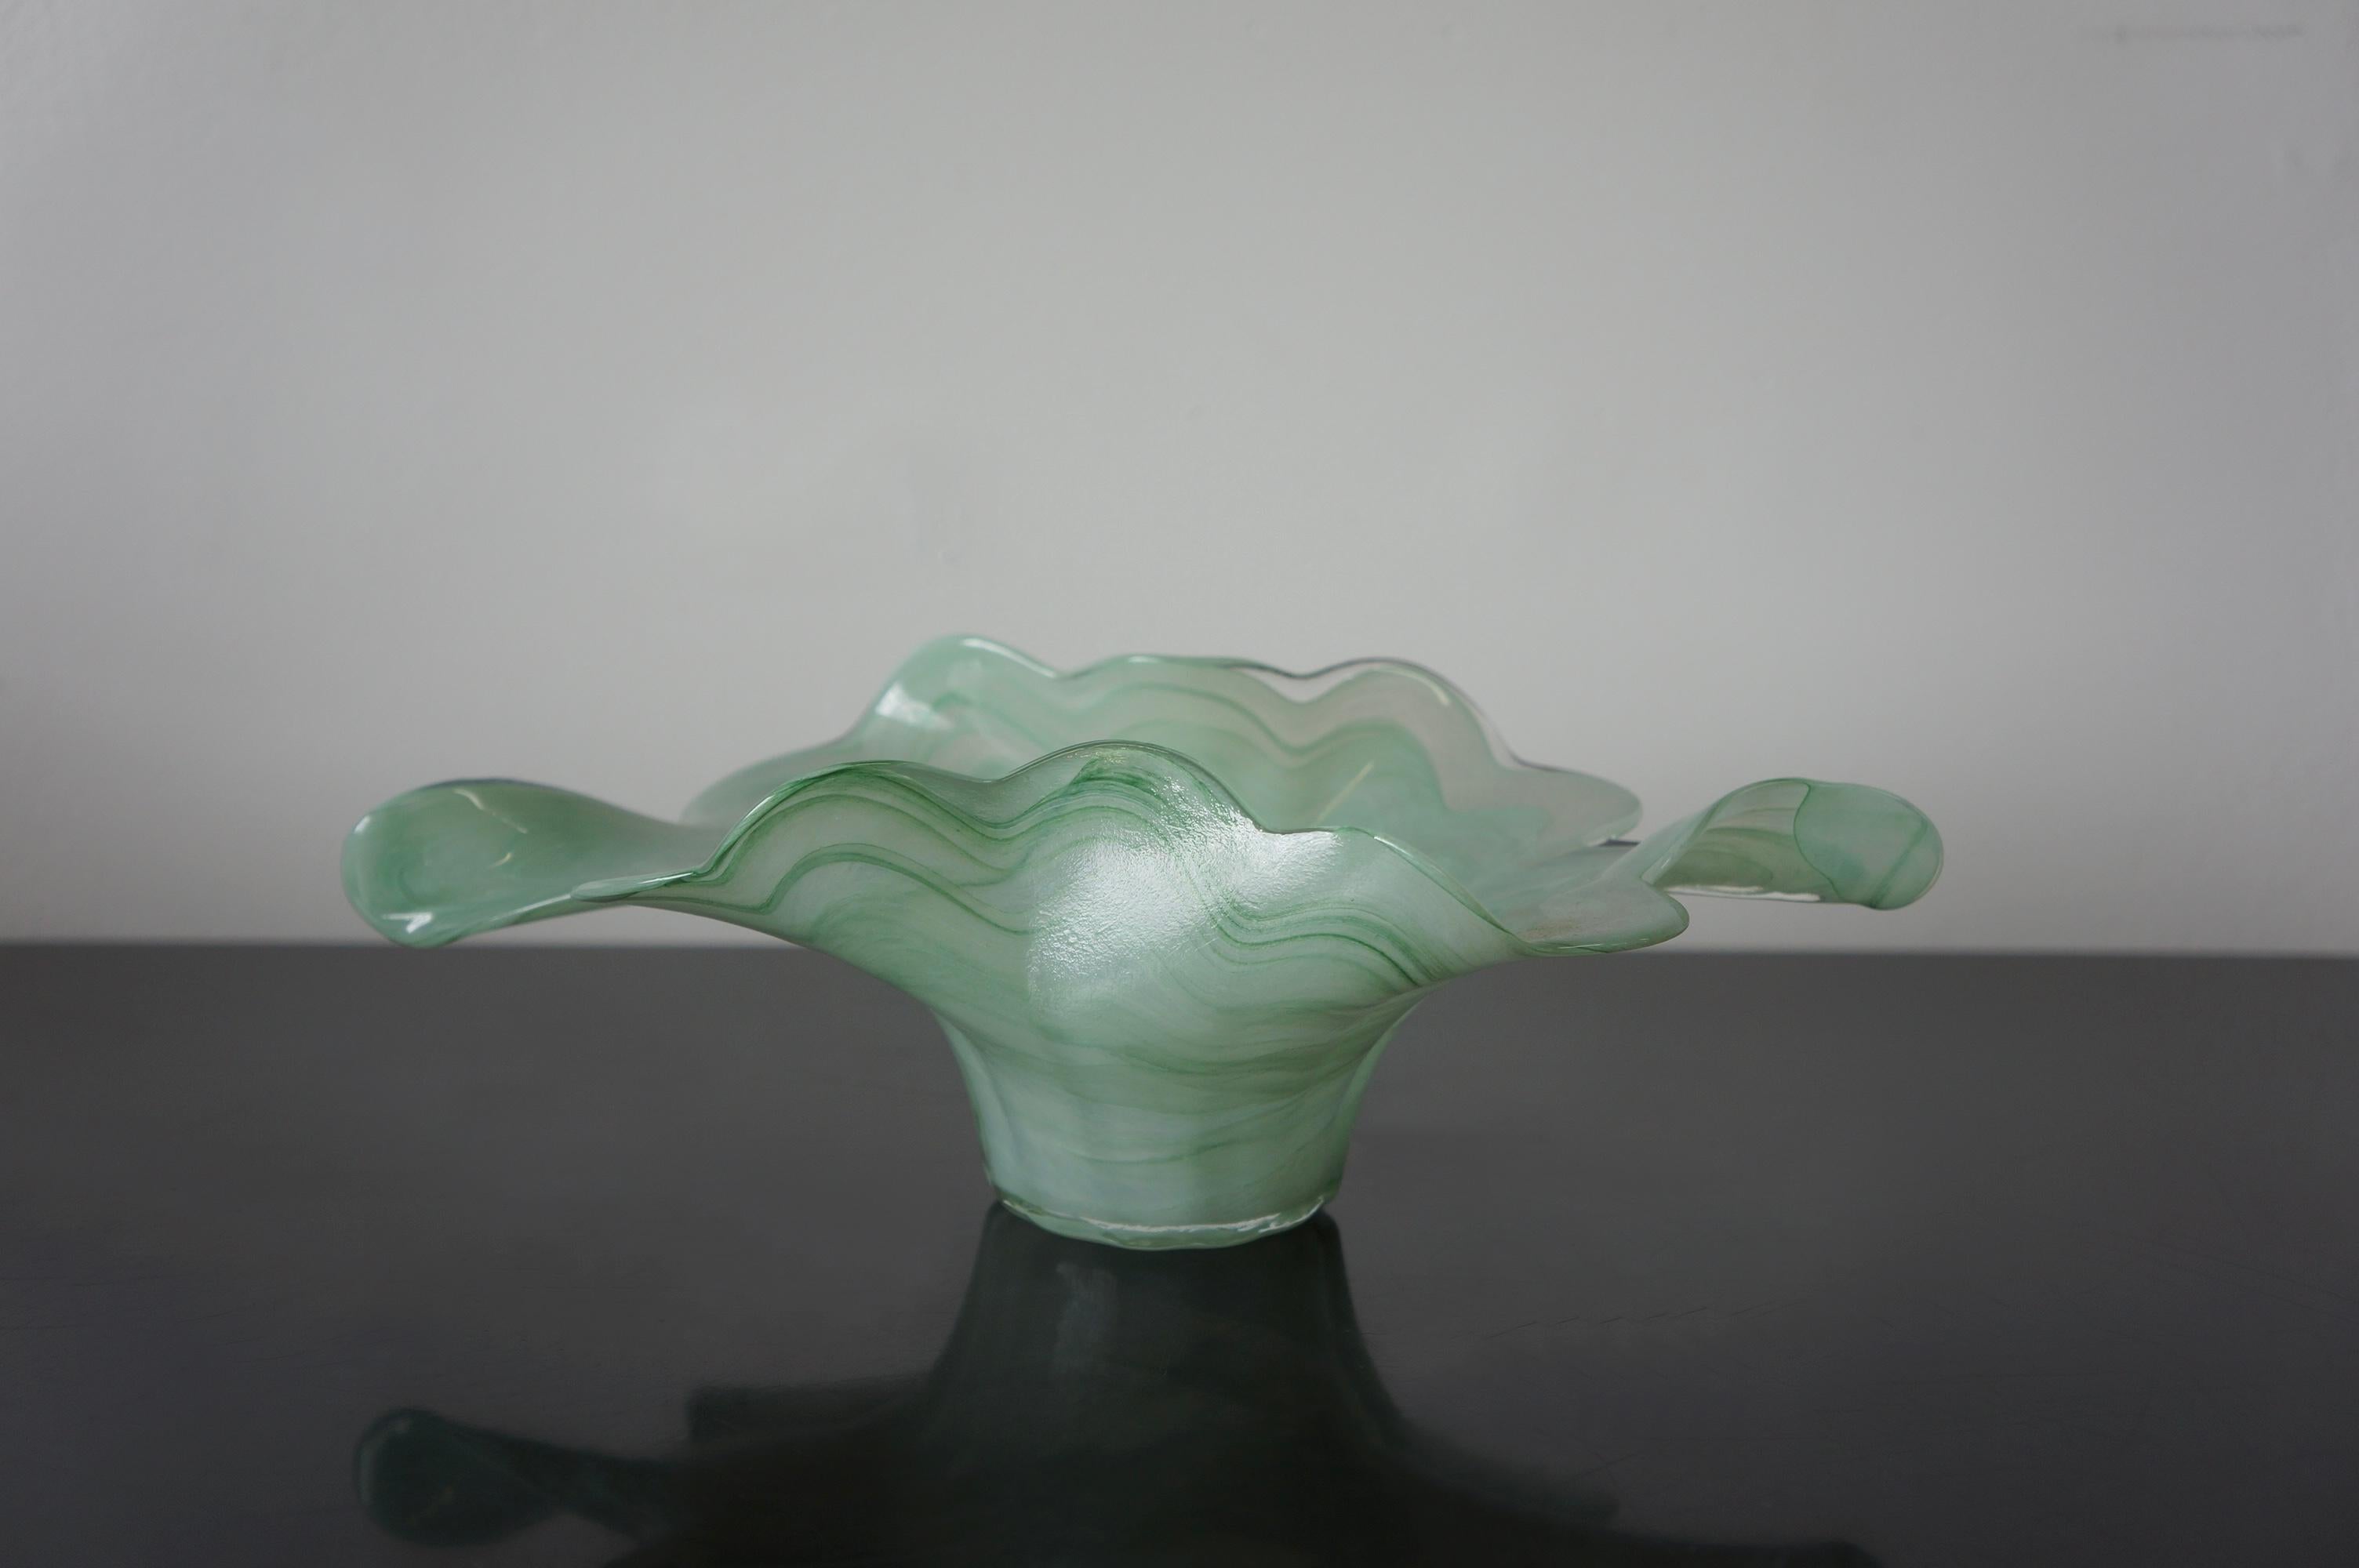 Unique Silvestri Arte Murano ribbon bowl in green swirled Art glass. It was made in Murano, Italy. This free form shaped is made with light green and clear swirled Art glass. The translucent green glass is intertwined with clear glass to give a